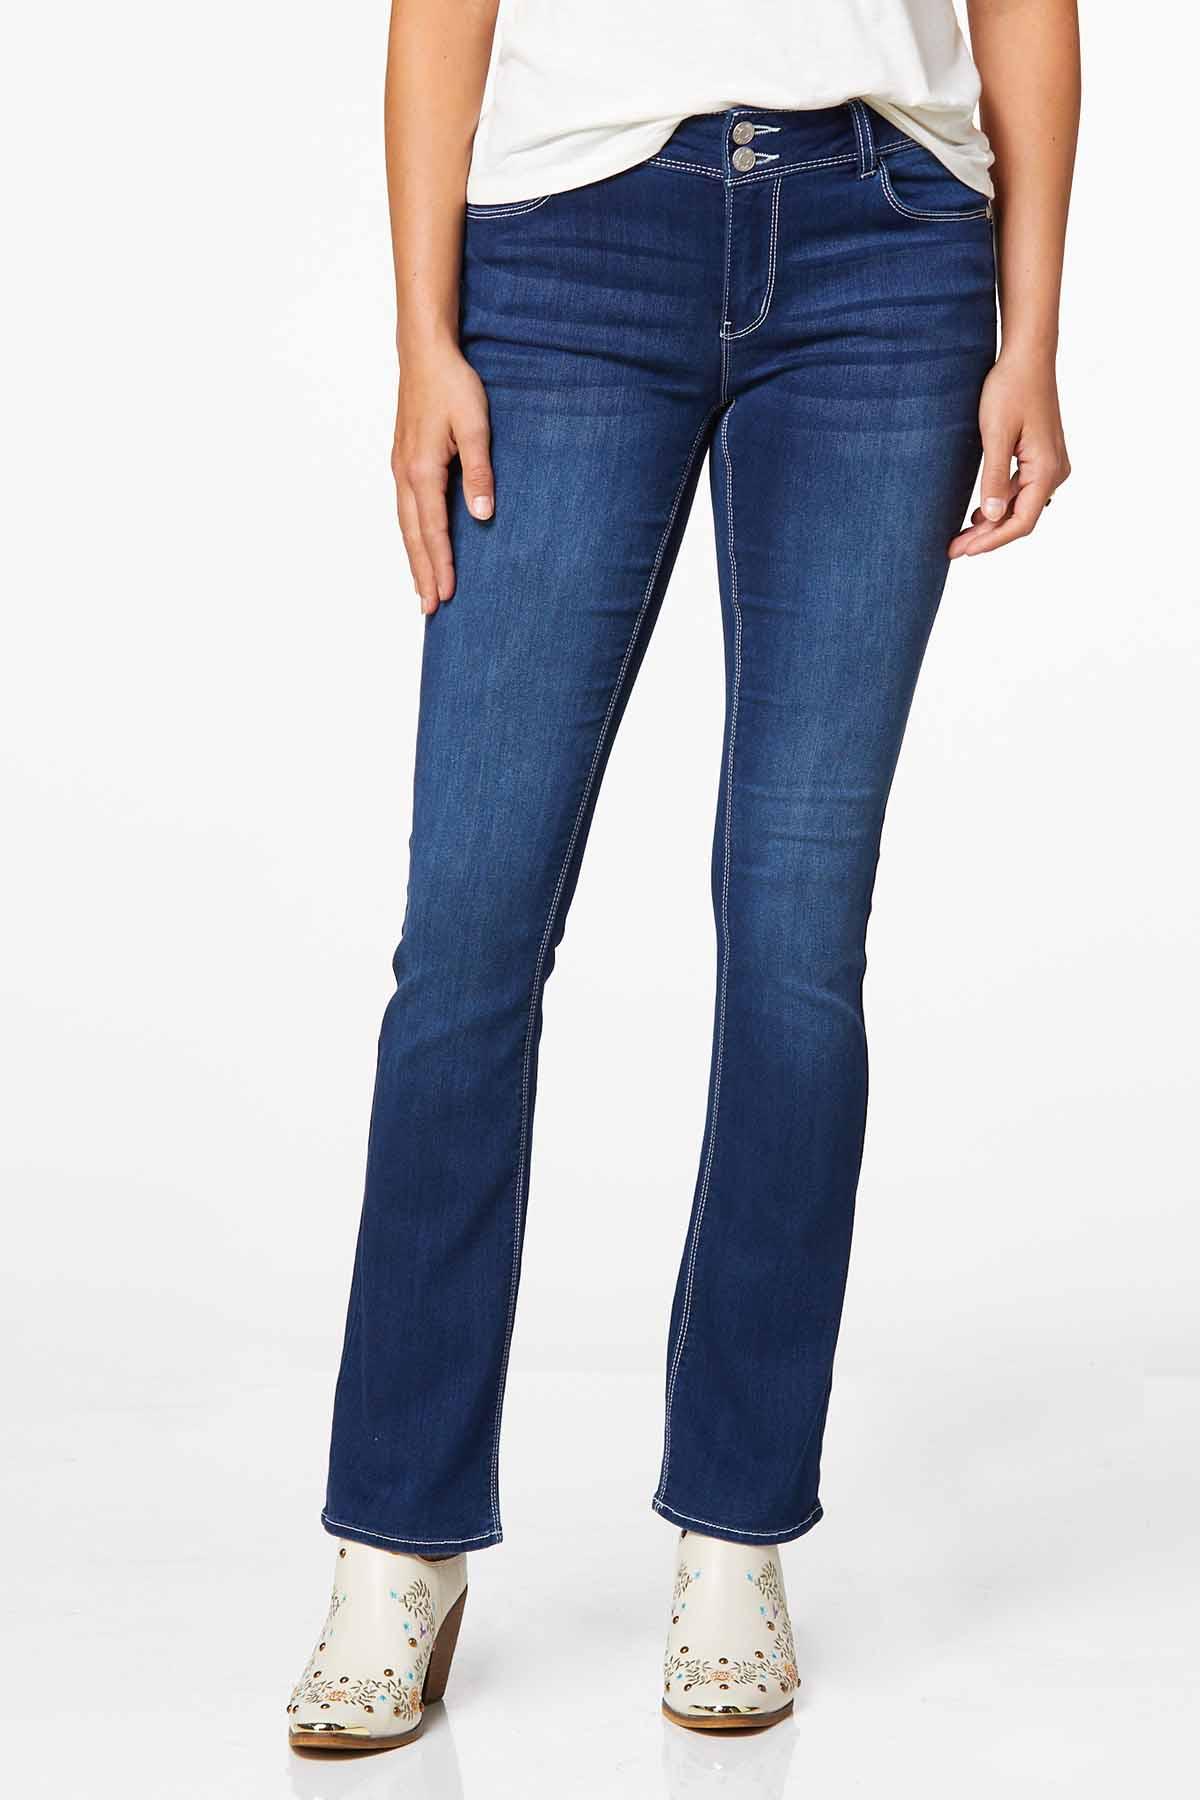 Cato Fashions | Cato Mid Rise Bootcut Jeans